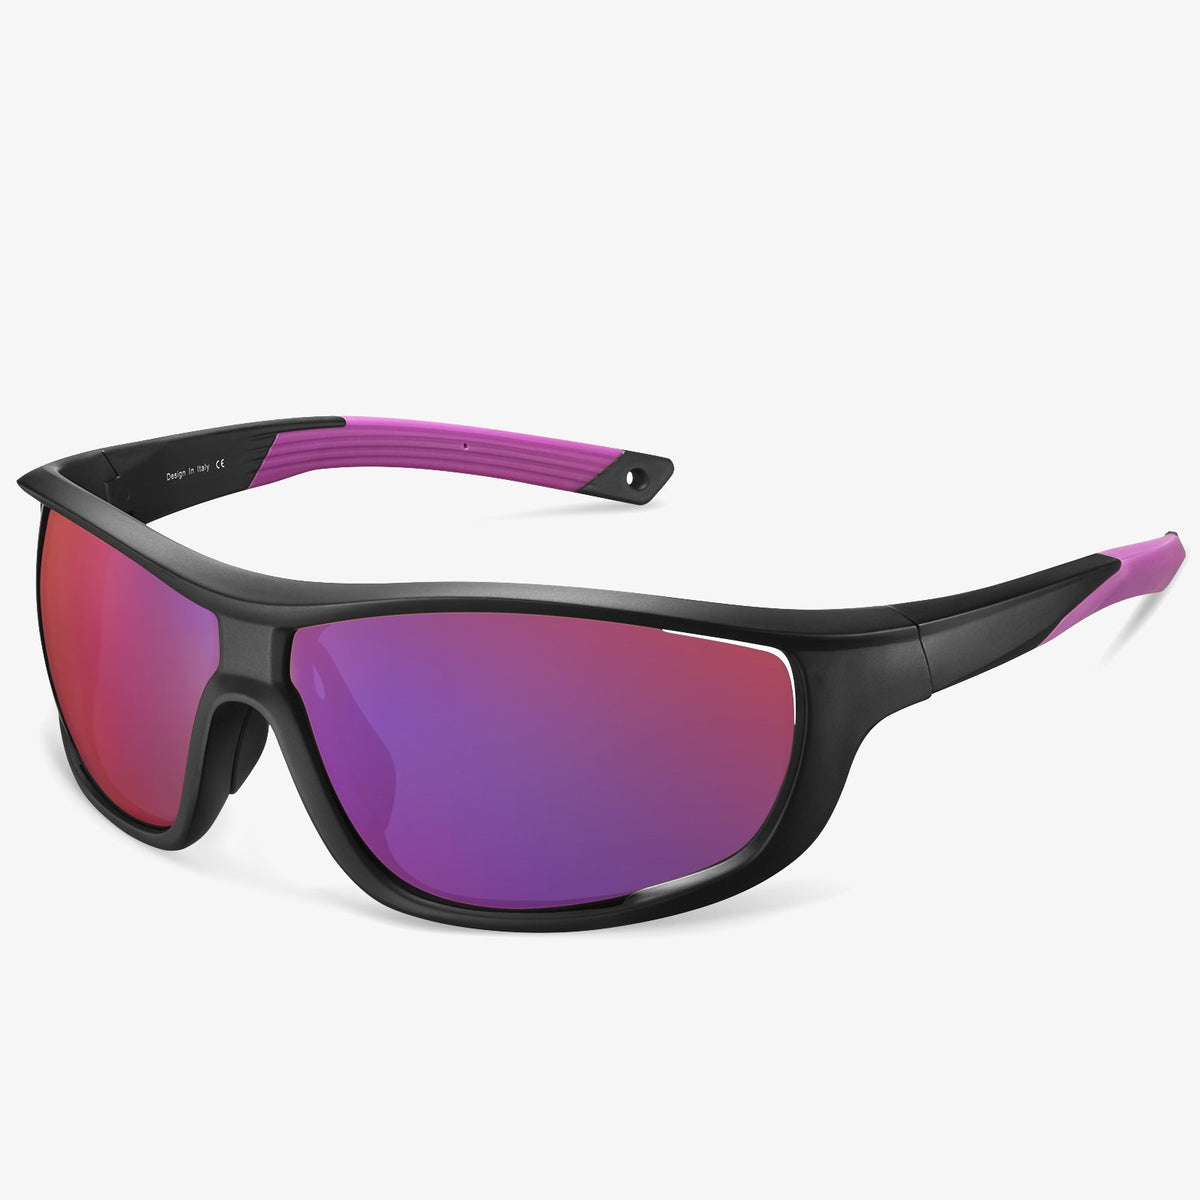 What Are The Best Sunglasses For Rowing